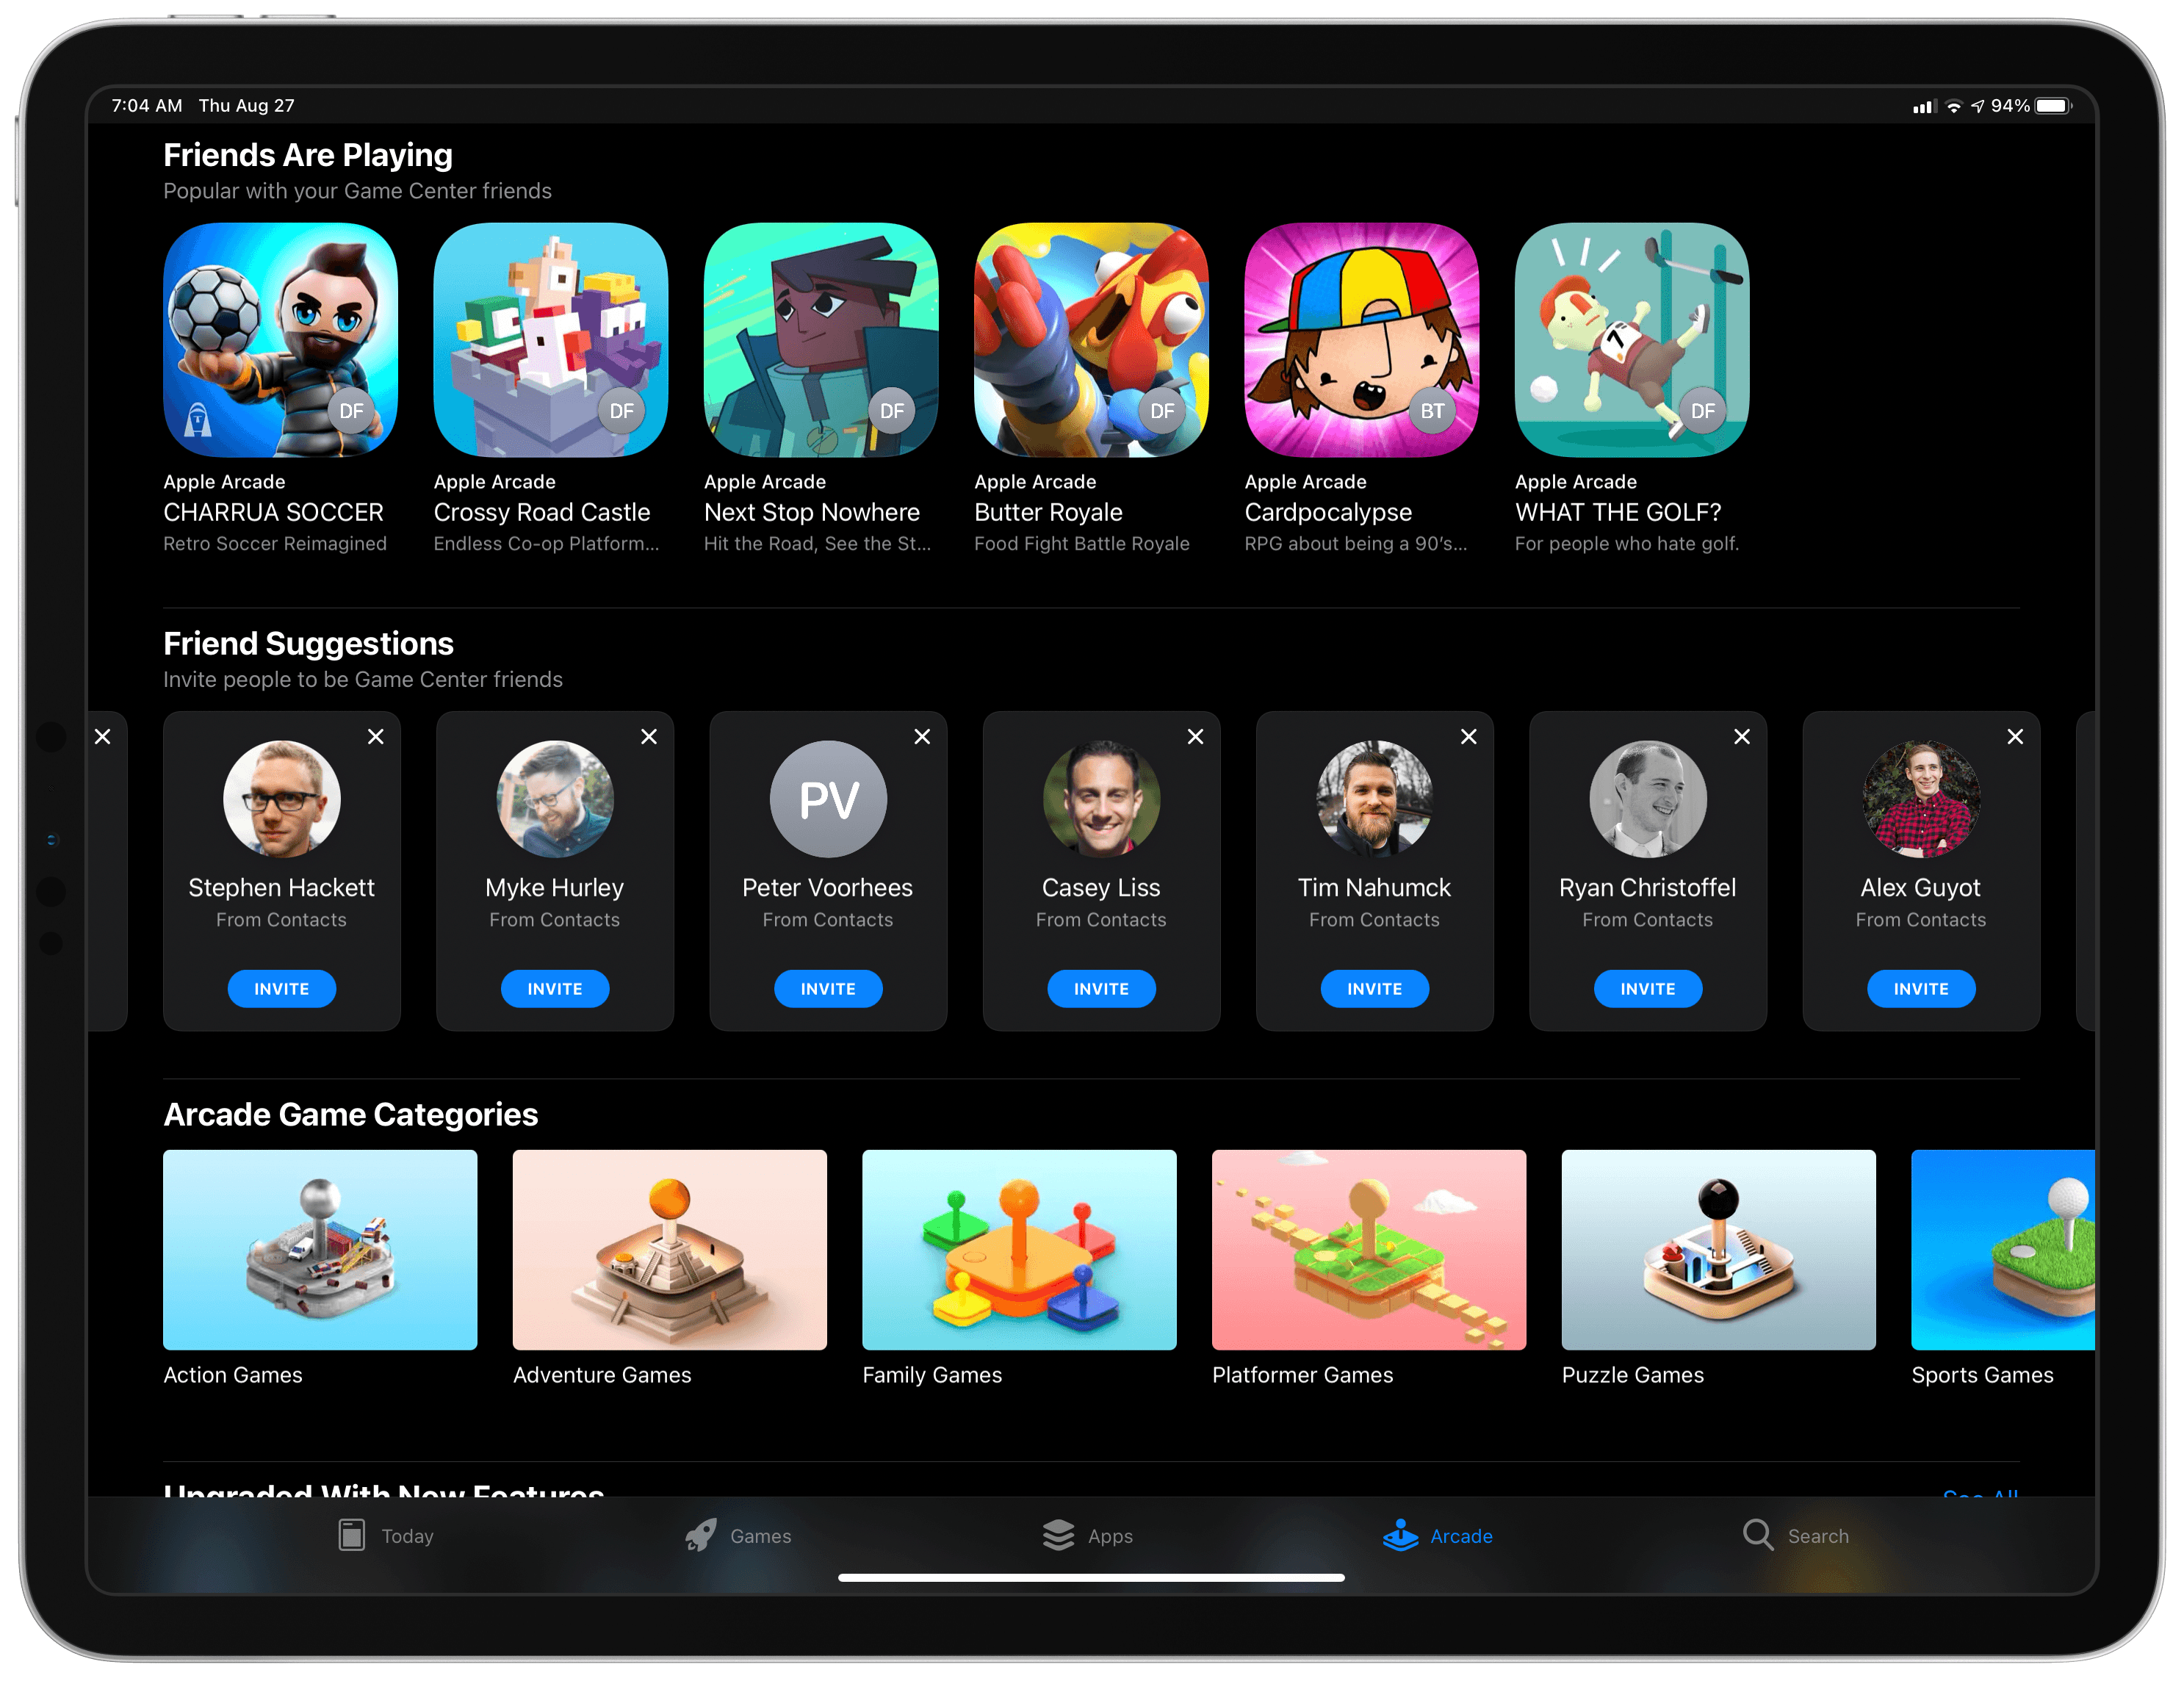 The App Store includes friends suggestions and details on what your friends are playing.